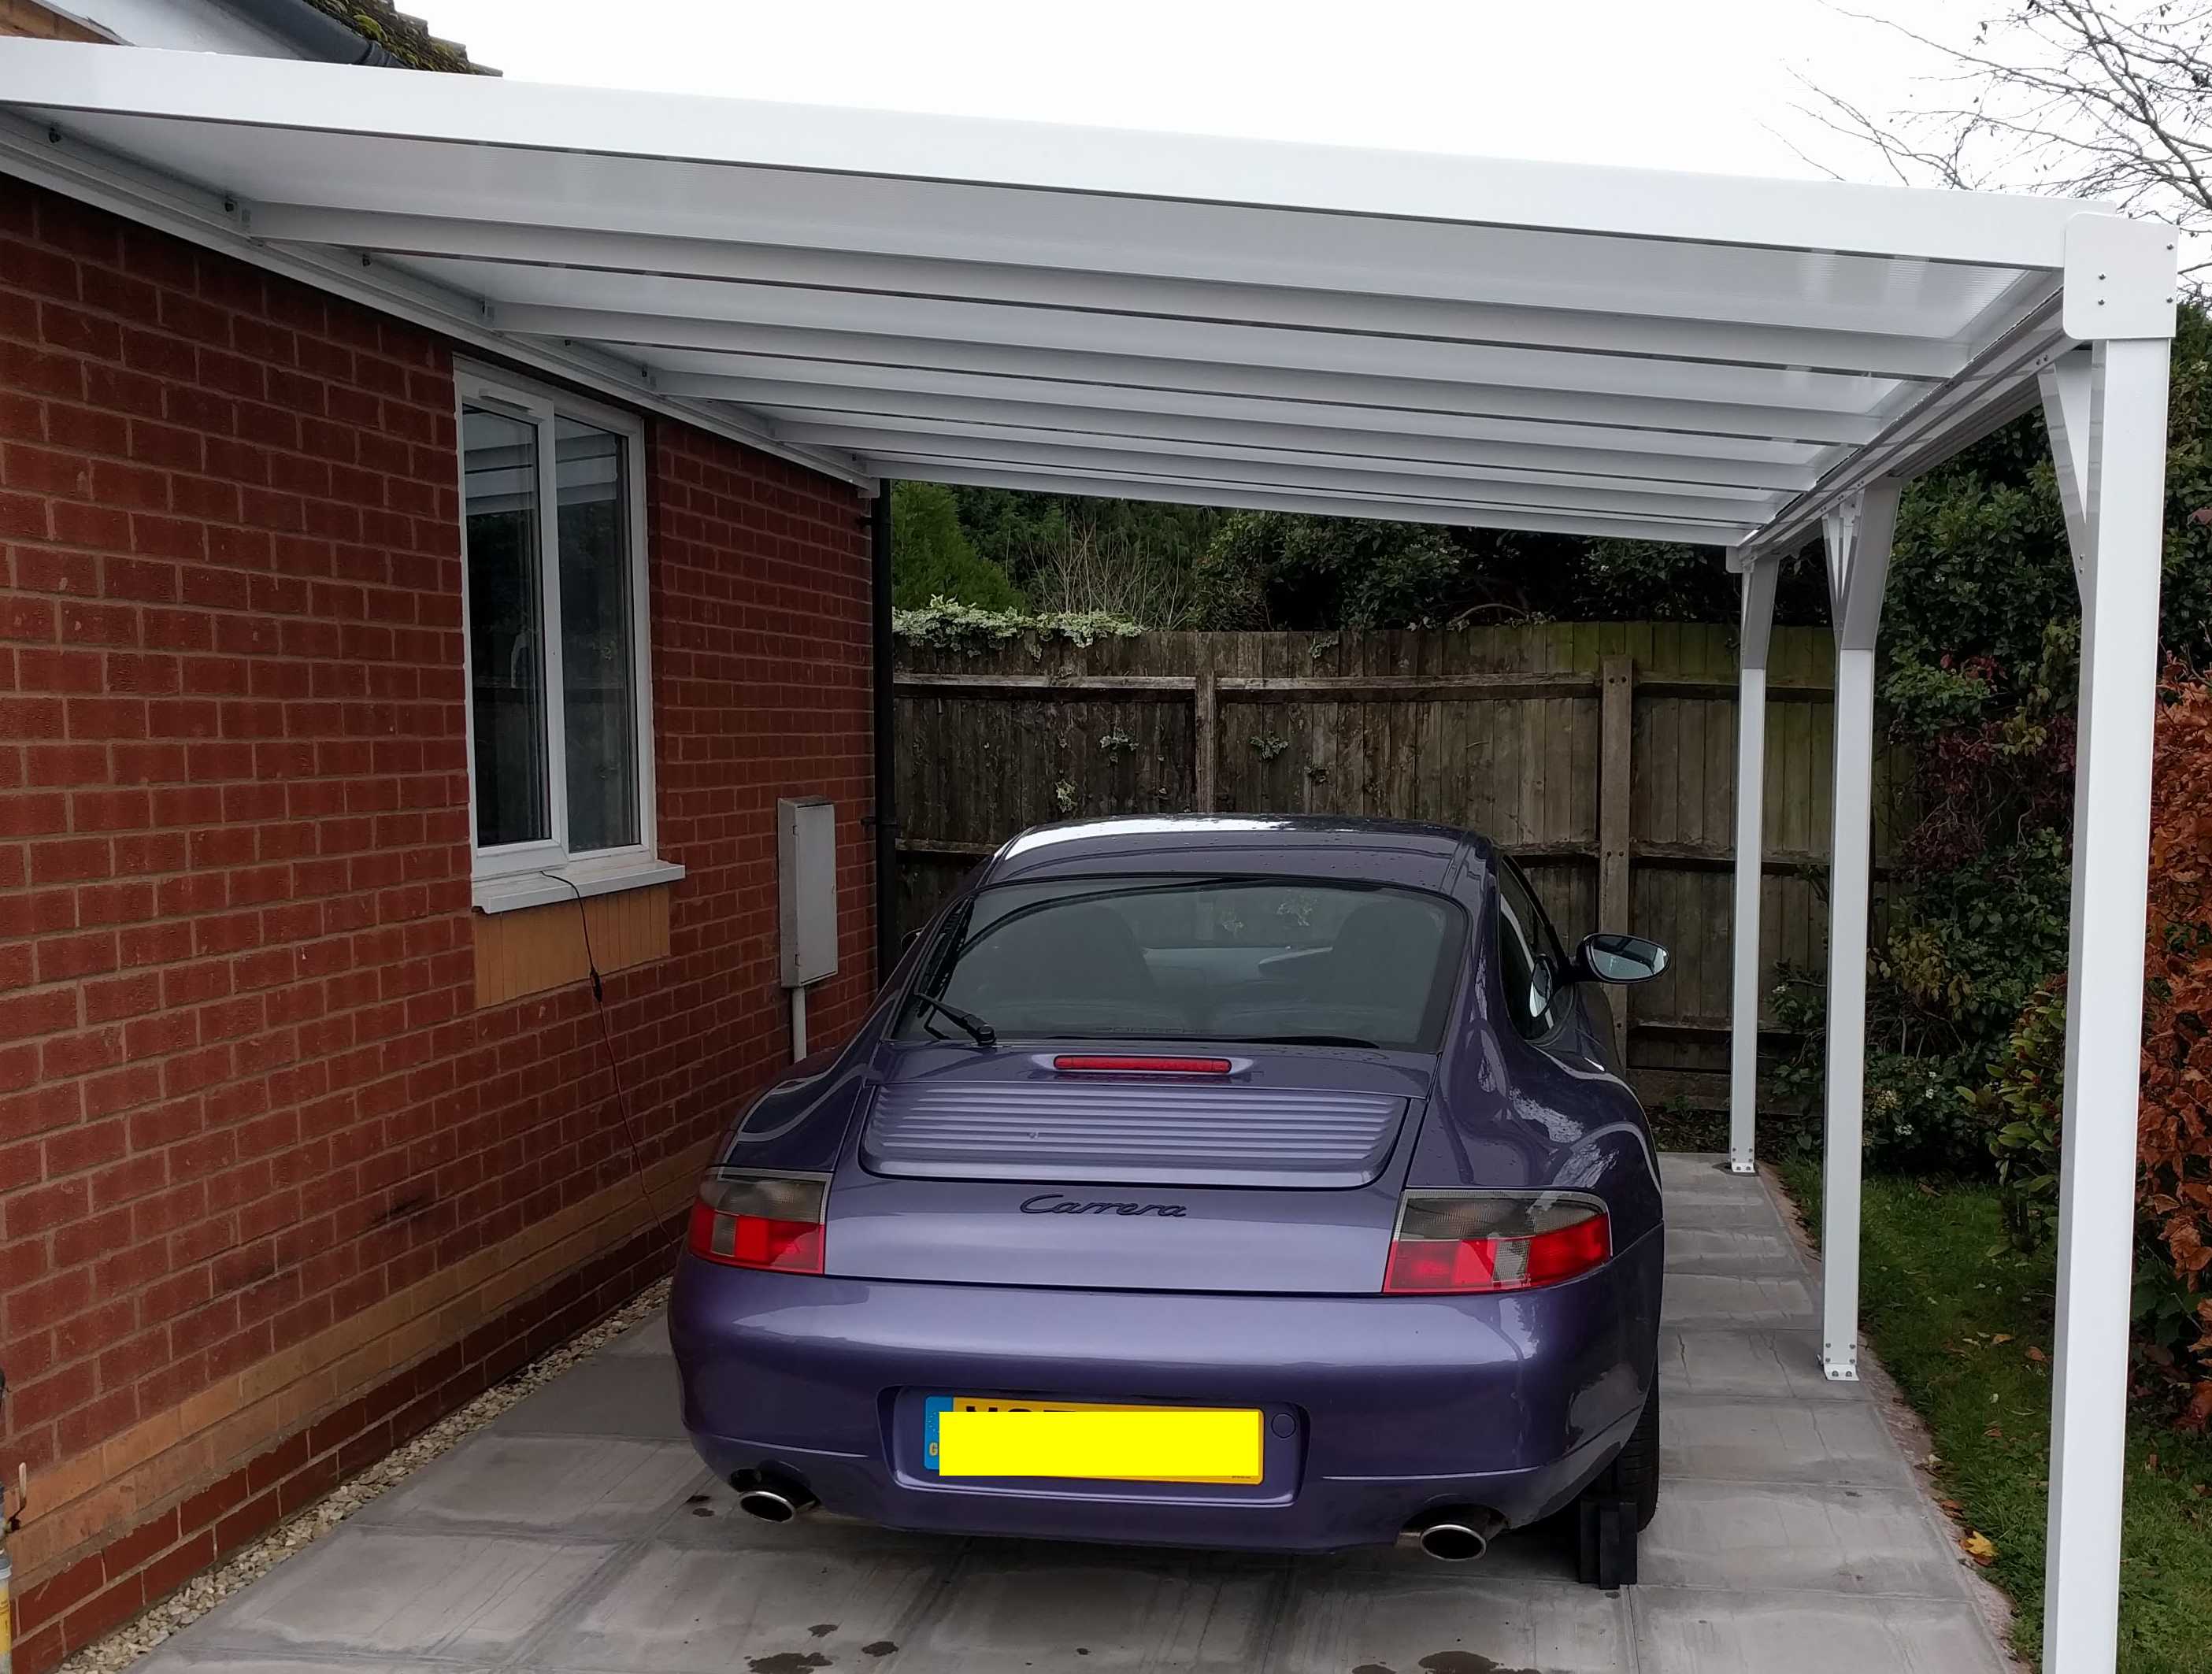 Omega Smart Canopy - Wall Mounted Lean To Canopy Kit - Polycarbonate canopy kits